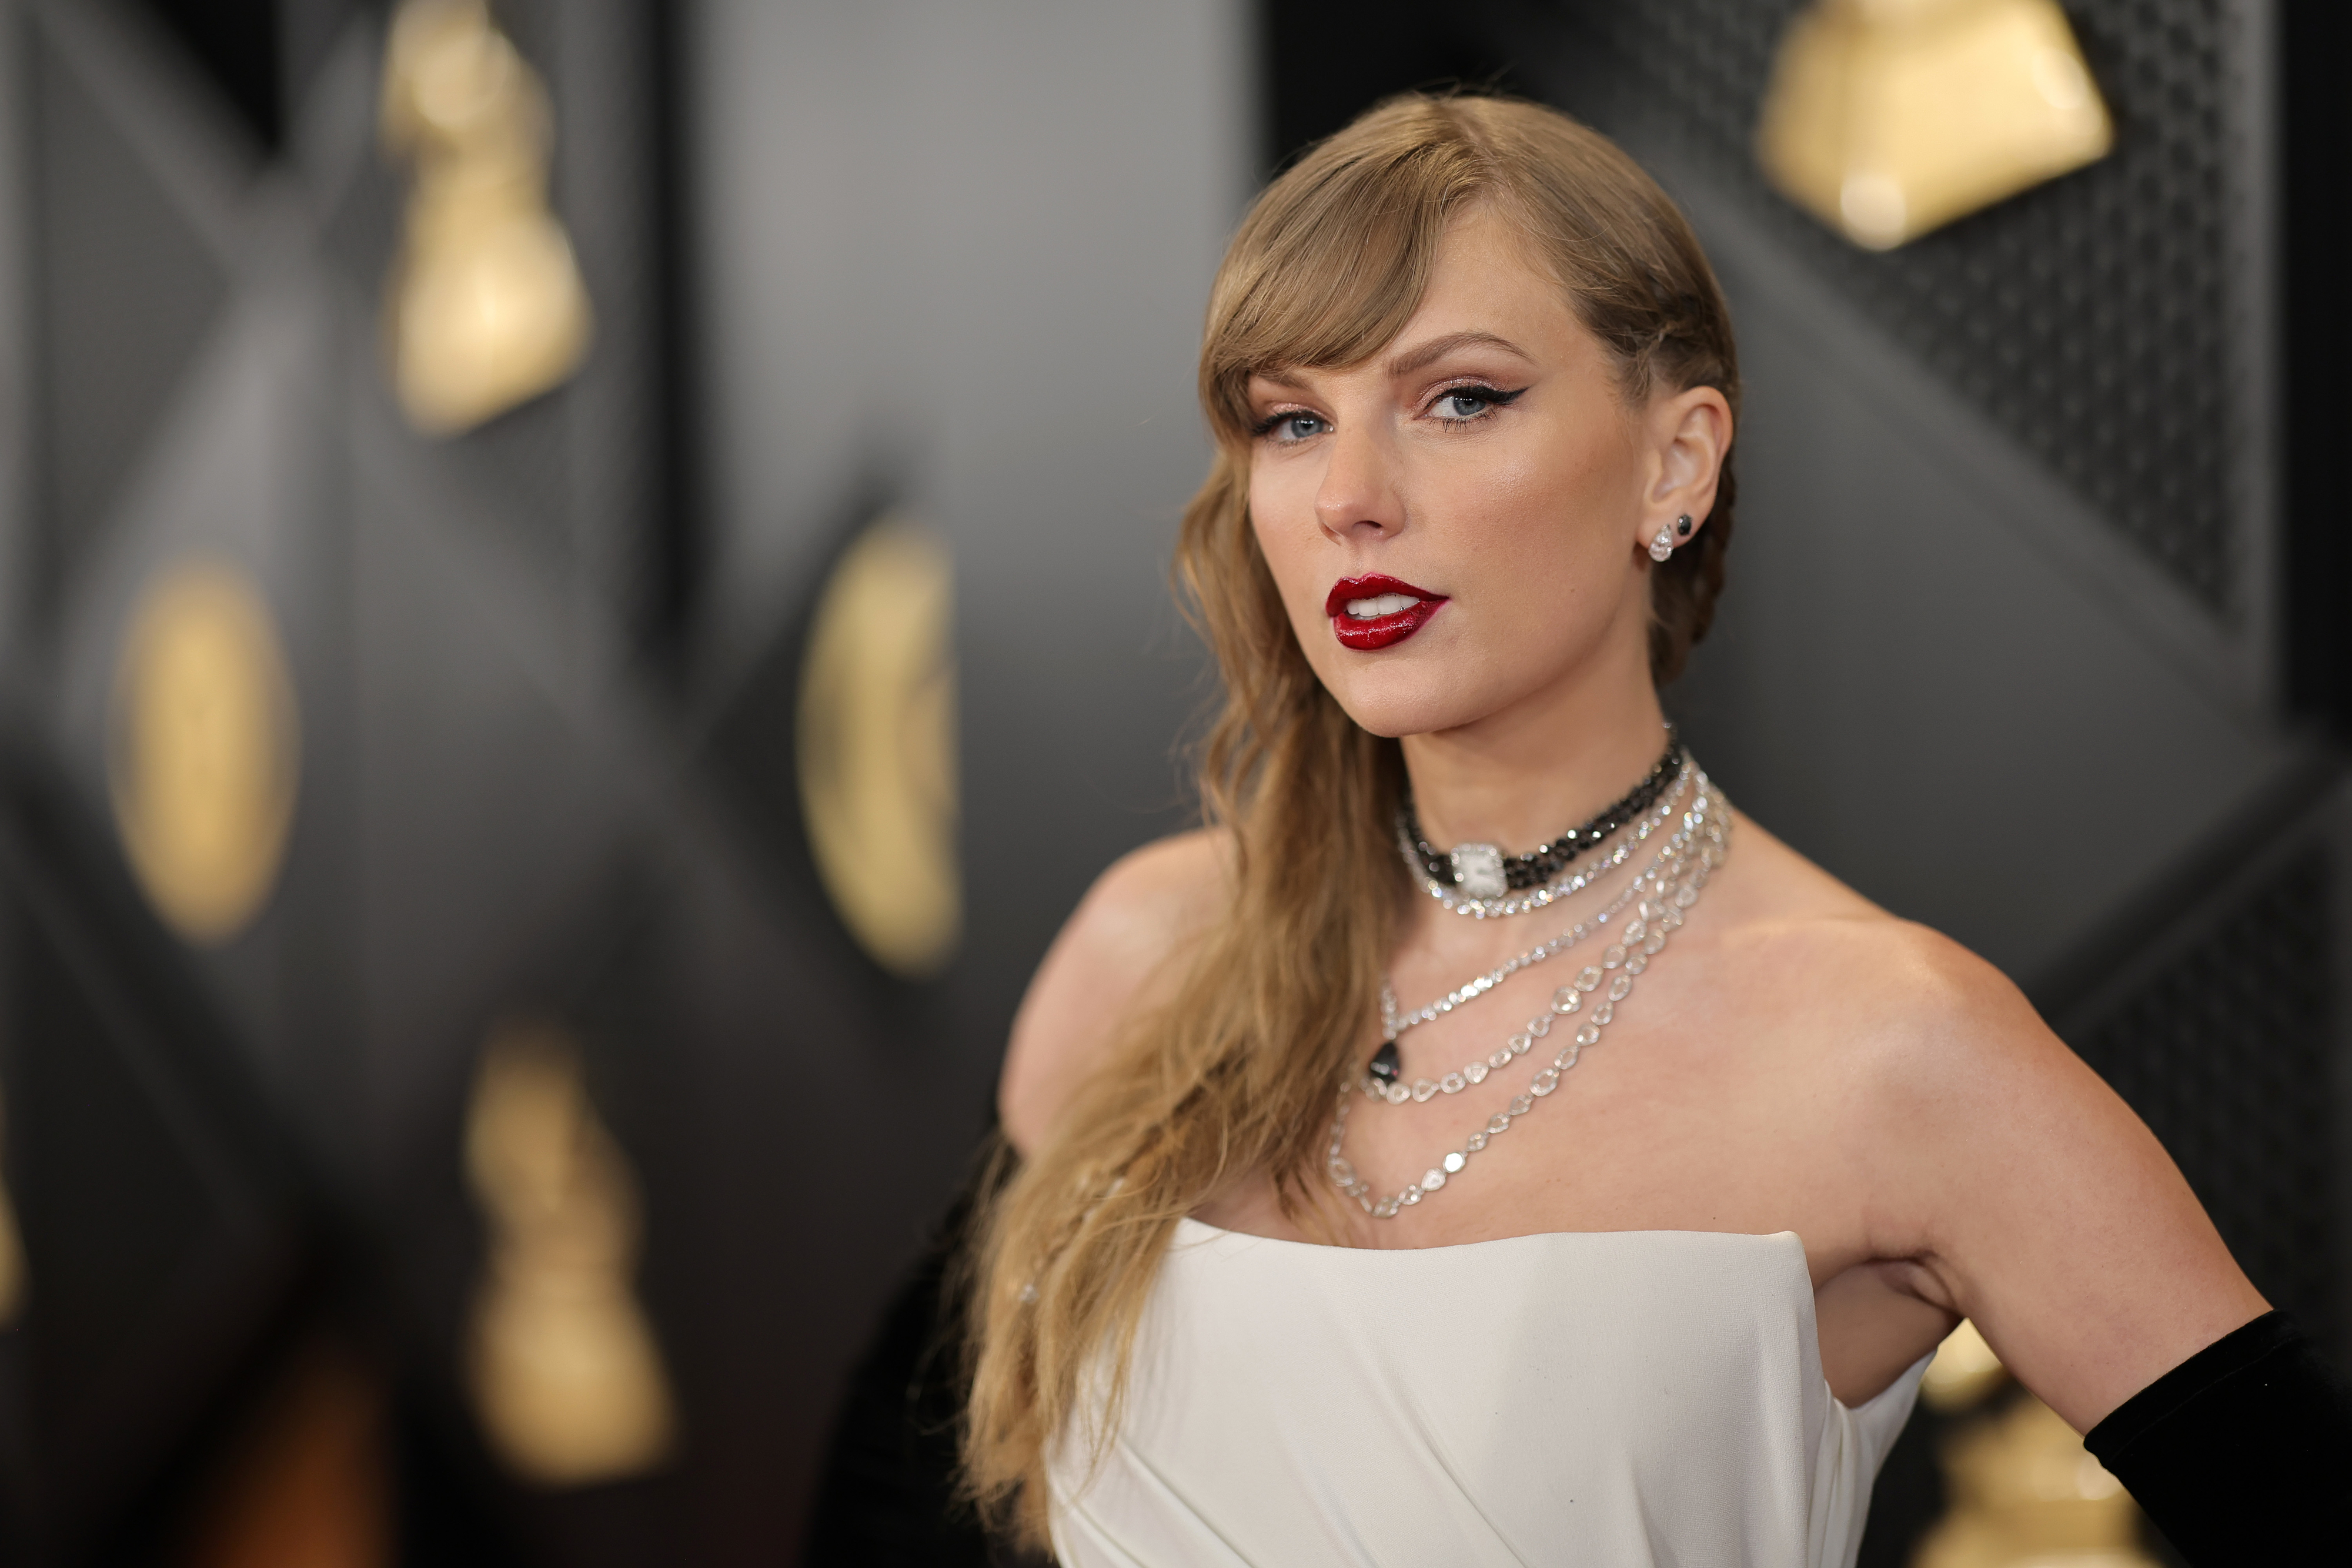 Taylor Swift posing at event in a white, off-the-shoulder gown with layered necklaces